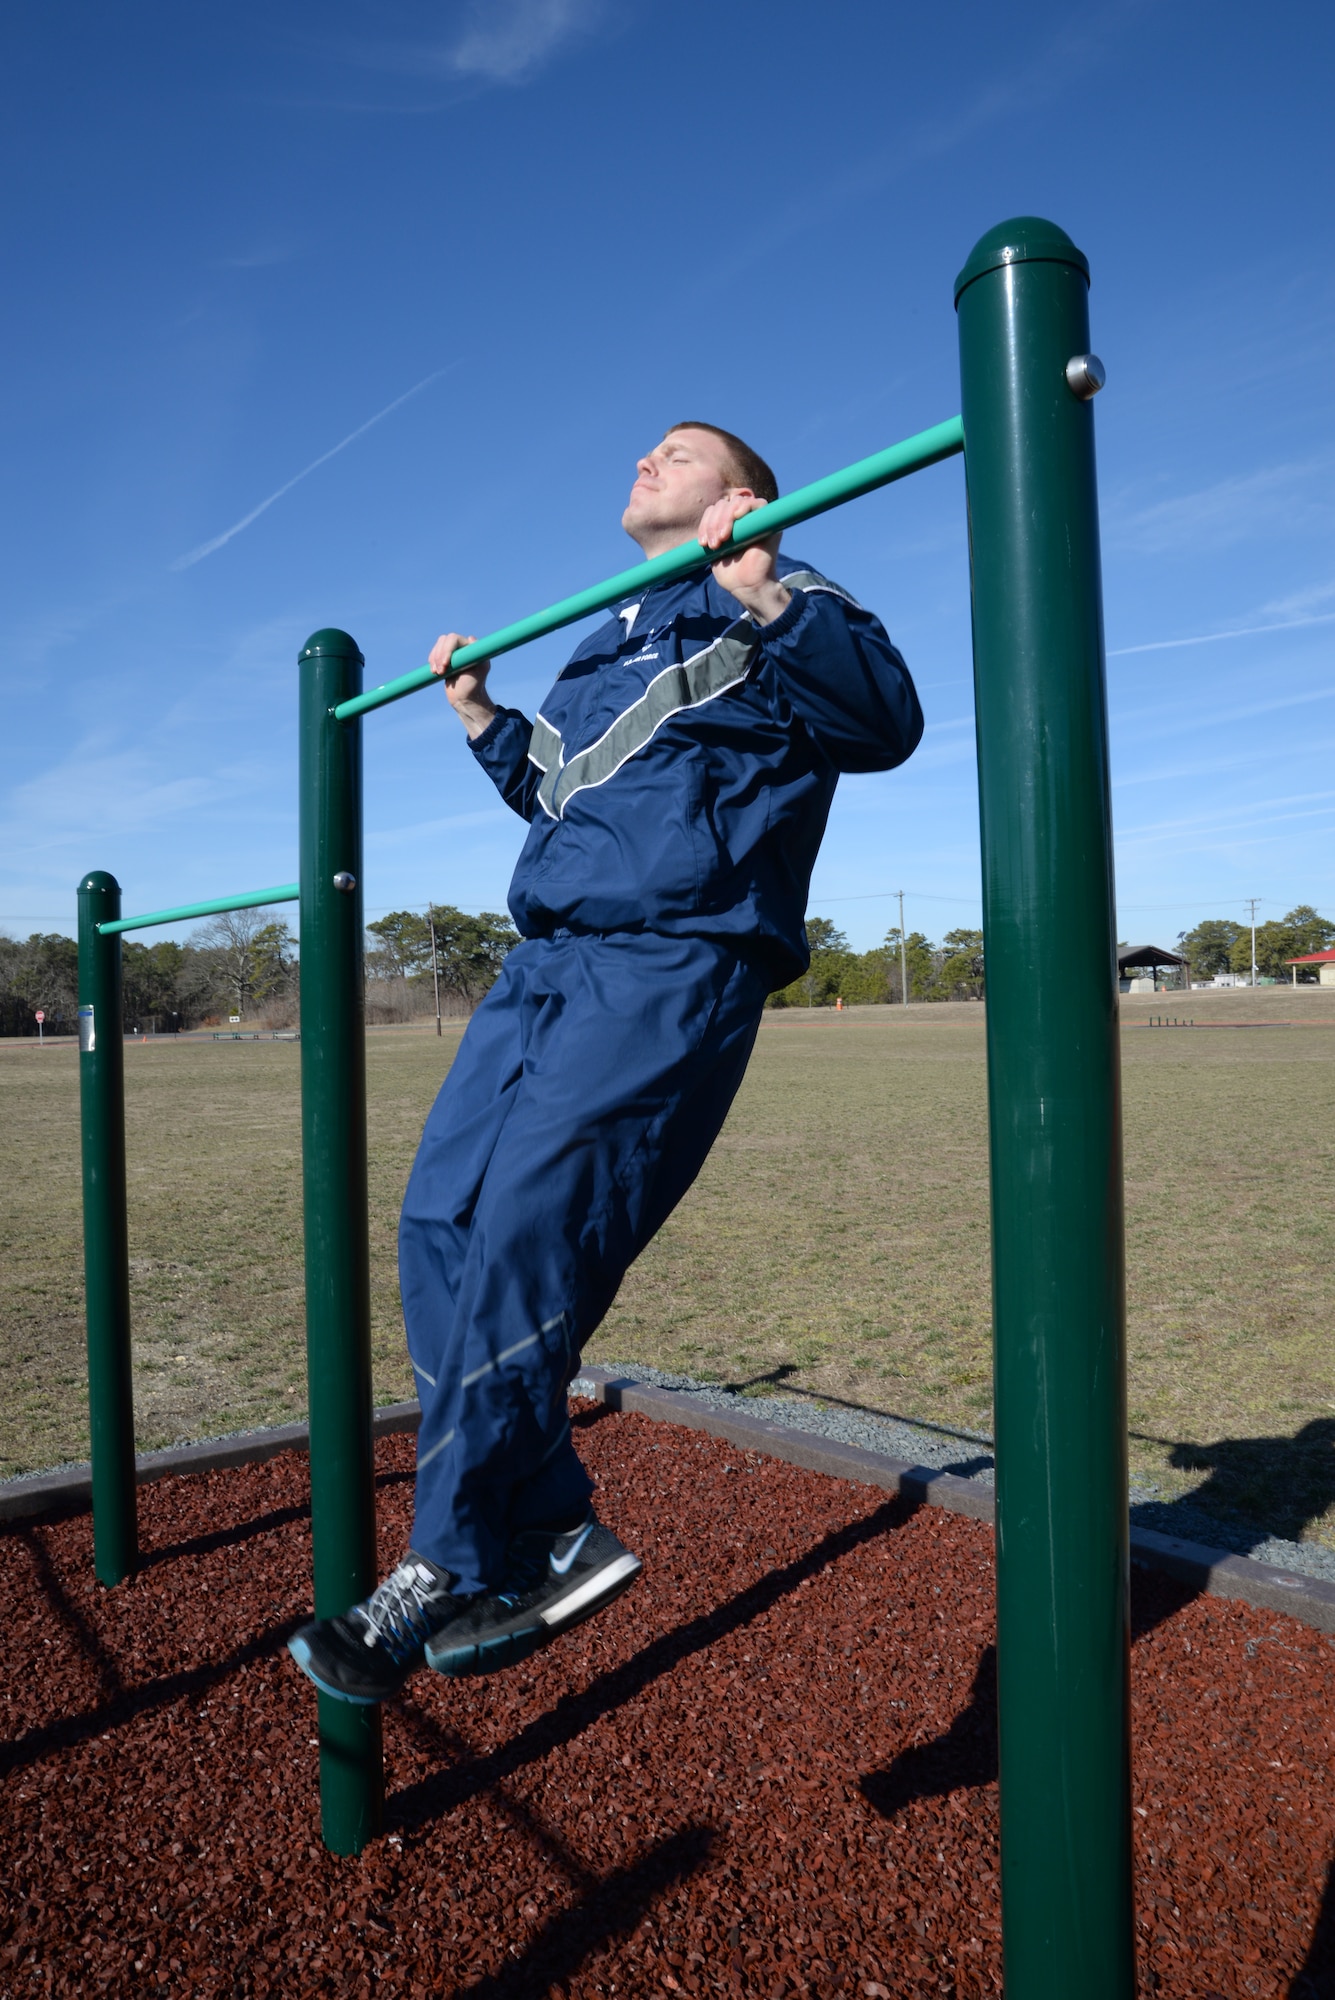 A picture of U.S. Air Force Tech. Sgt. Bob Johnson, management inspector with the 177th Fighter Wing Logistics Readiness Squadron of the New Jersey Air National Guard, doing chin-ups at a new workout station.